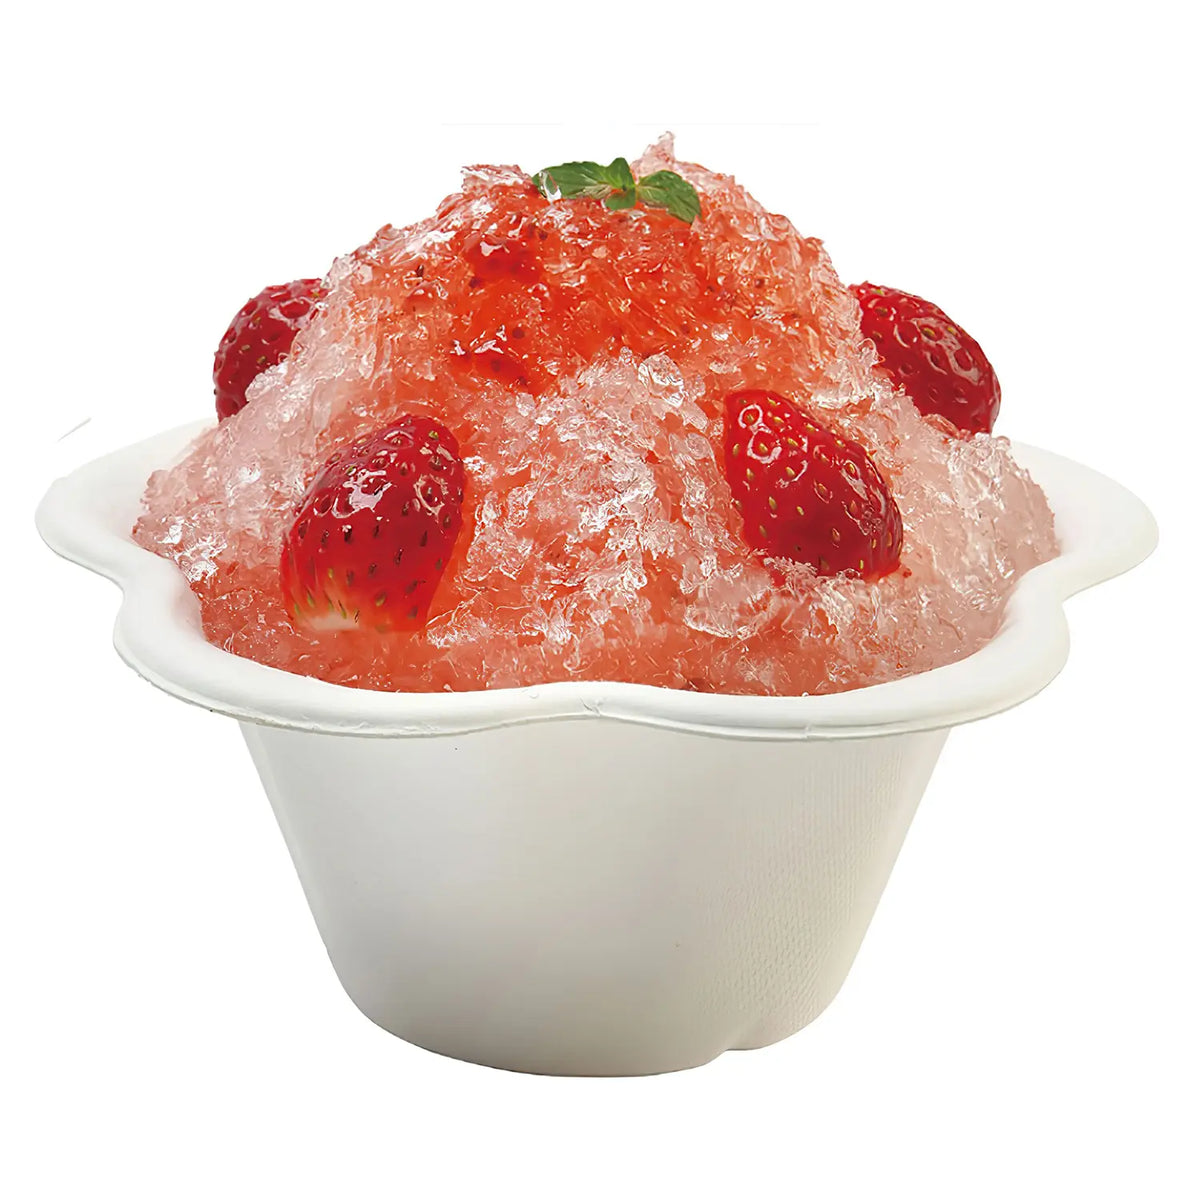 SUNNAP Non-wood Pulp Shaved Ice Cup 50 pcs